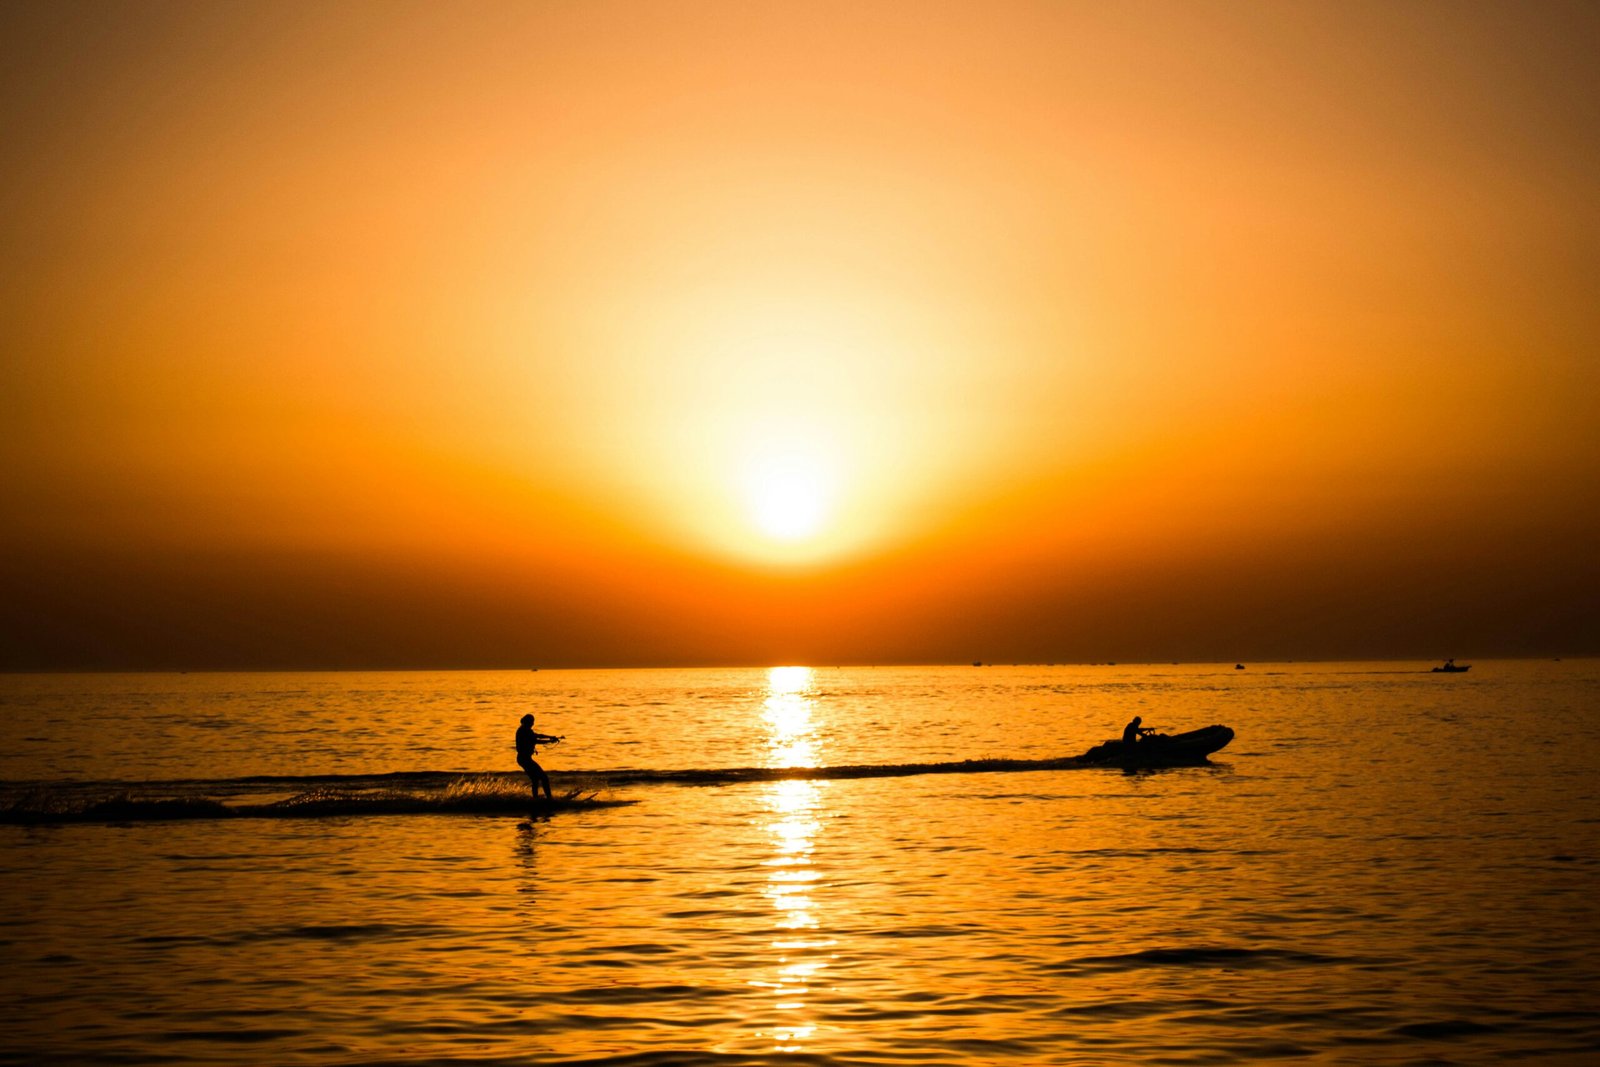 silhouette photo of man riding a motorboat with man surfboarding behind during golden hour